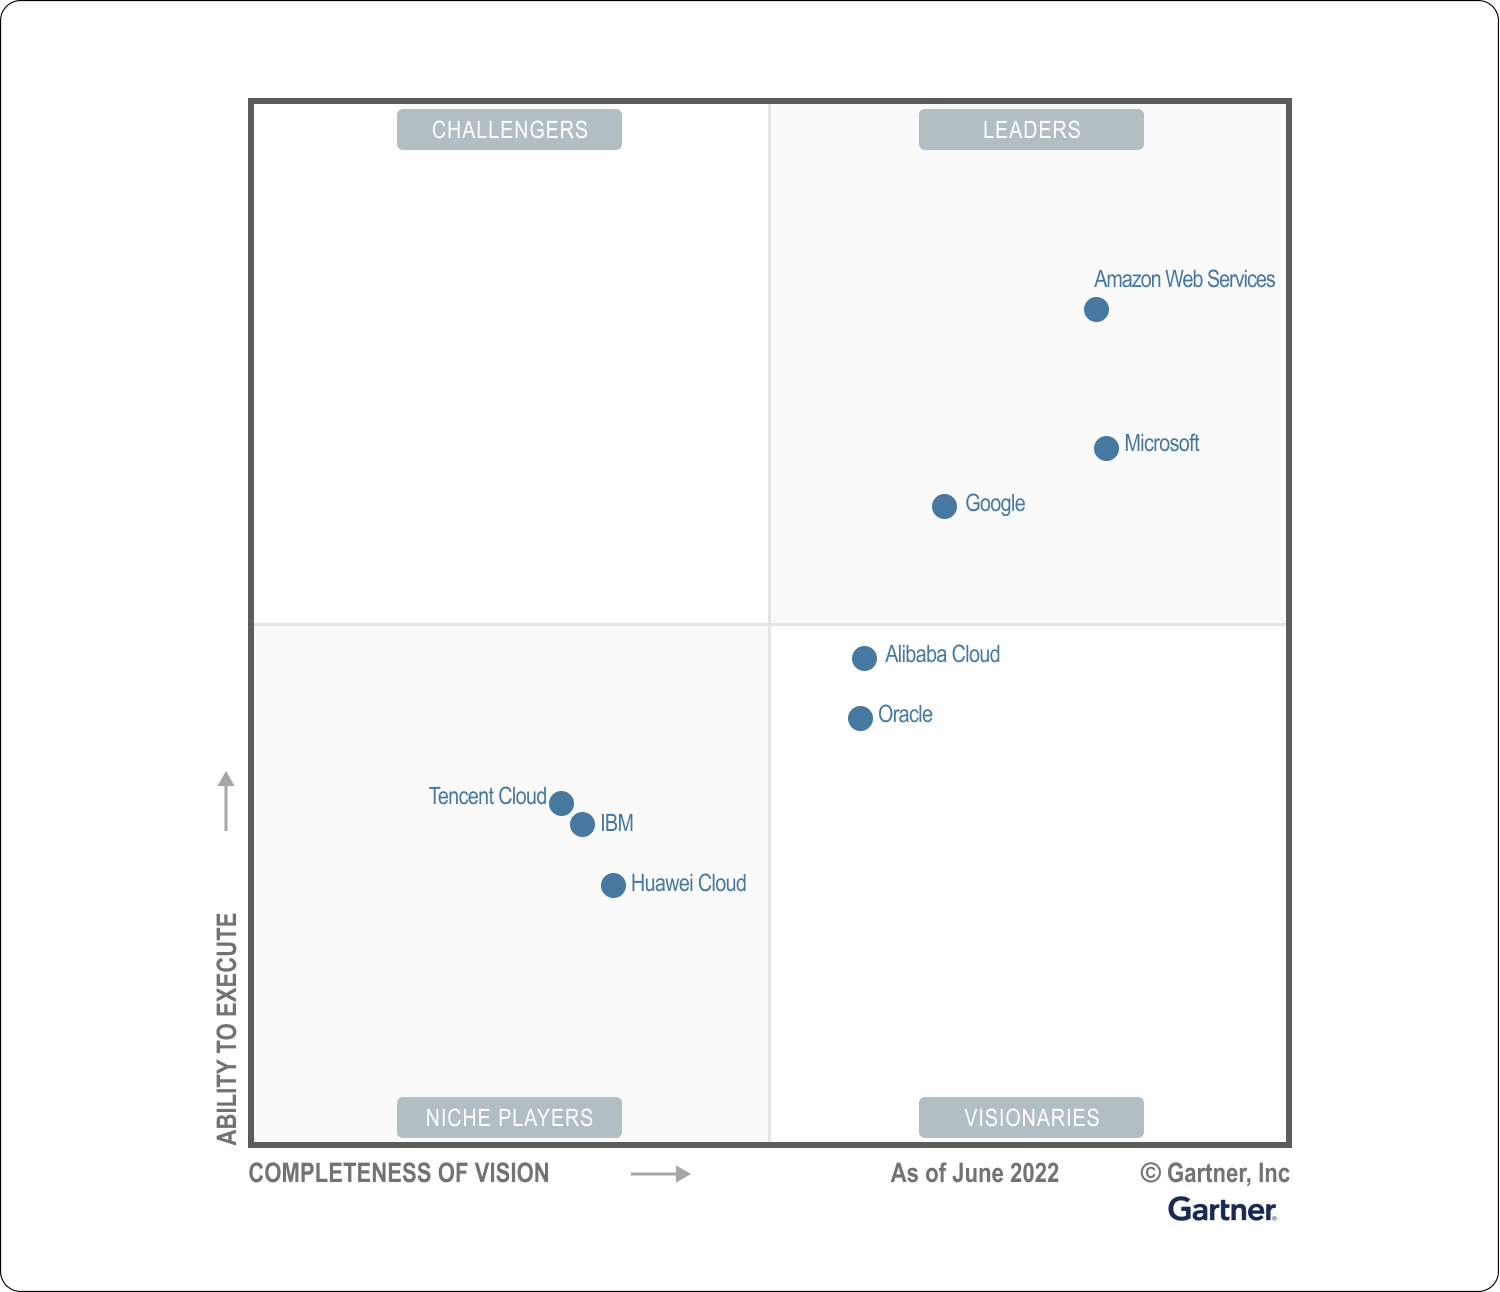 Magic Quadrant for Cloud Infrastructure and Platform Services
